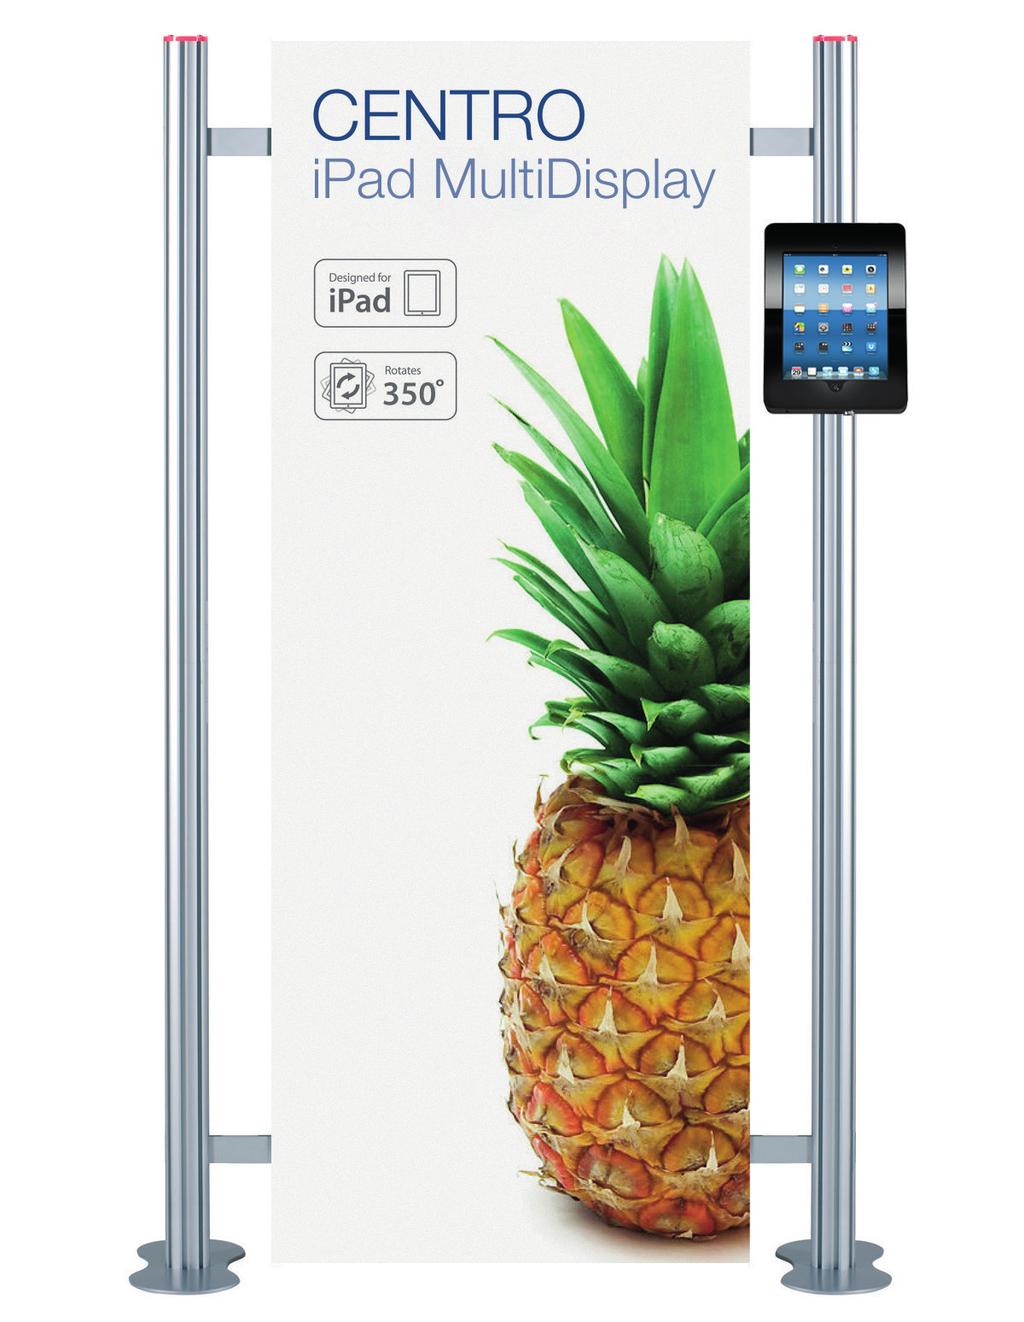 ipad Post Mount The ipad post enclosure is designed to carry an ipad whilst allowing secure fixing to the uprights of the Centro range of portable display stands.